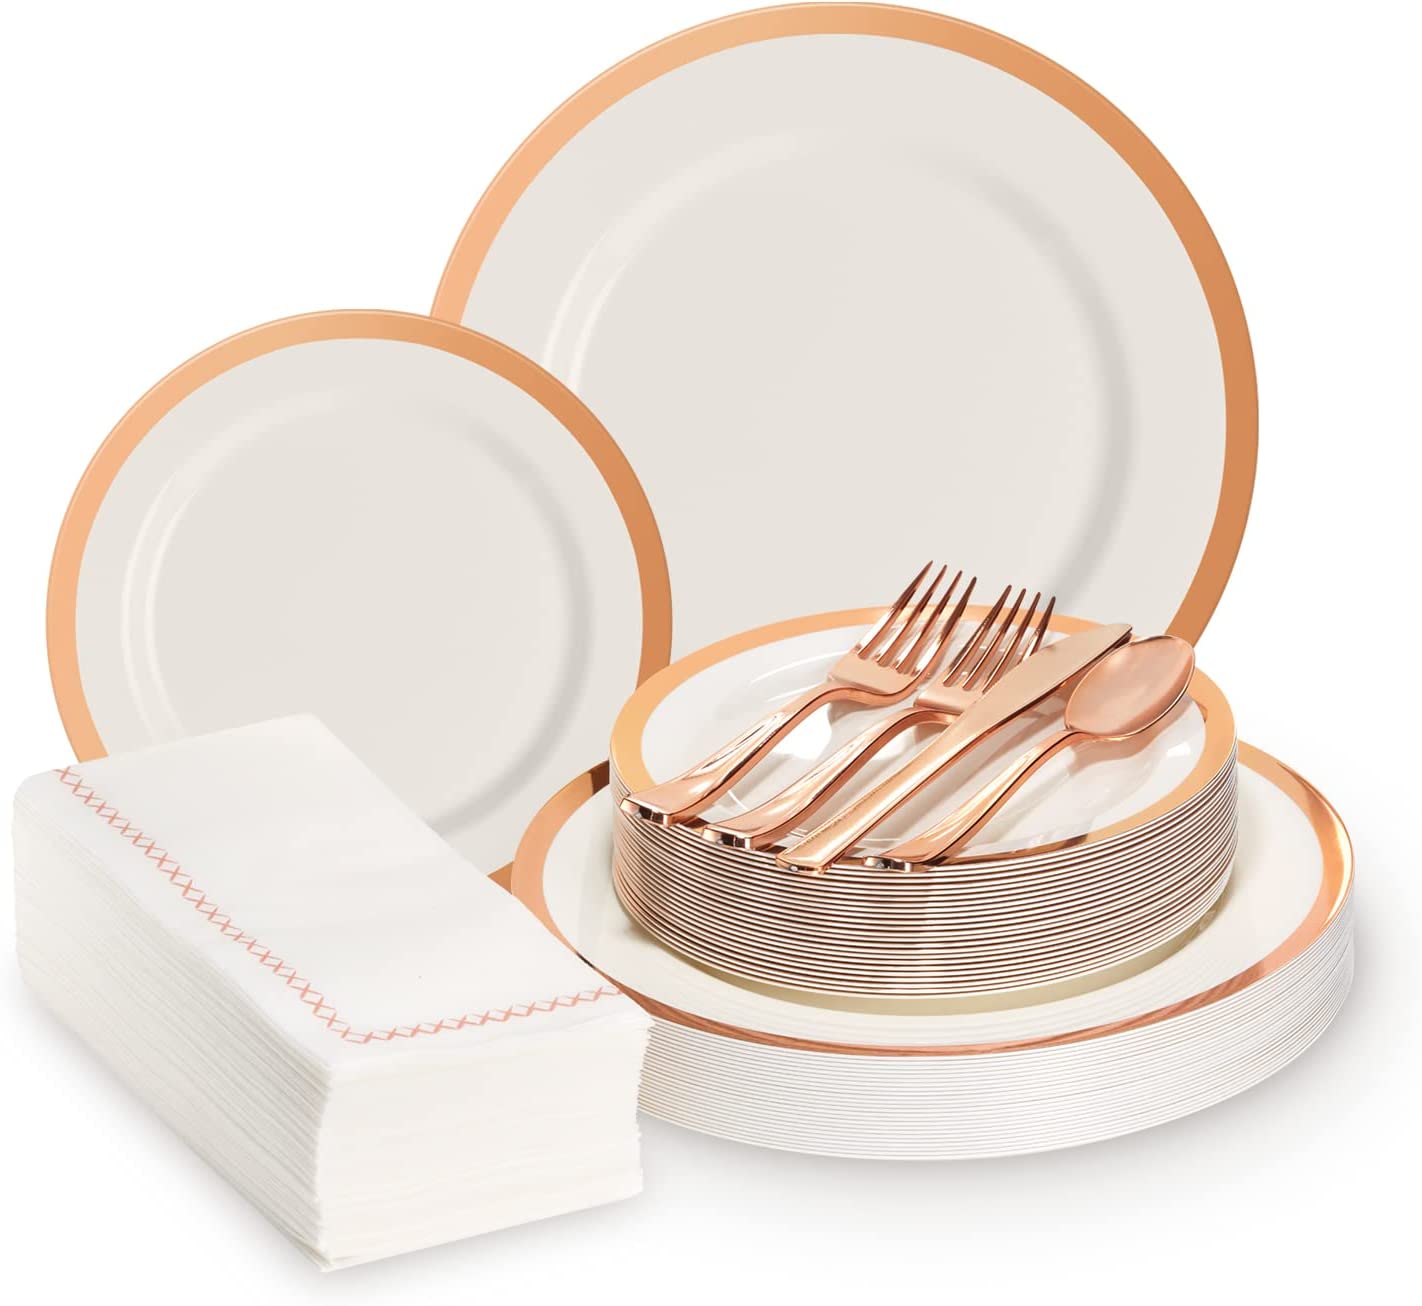 BY MADEE: Rose Gold Plastic Plates Disposable Dinnerware Set for 25 Guests